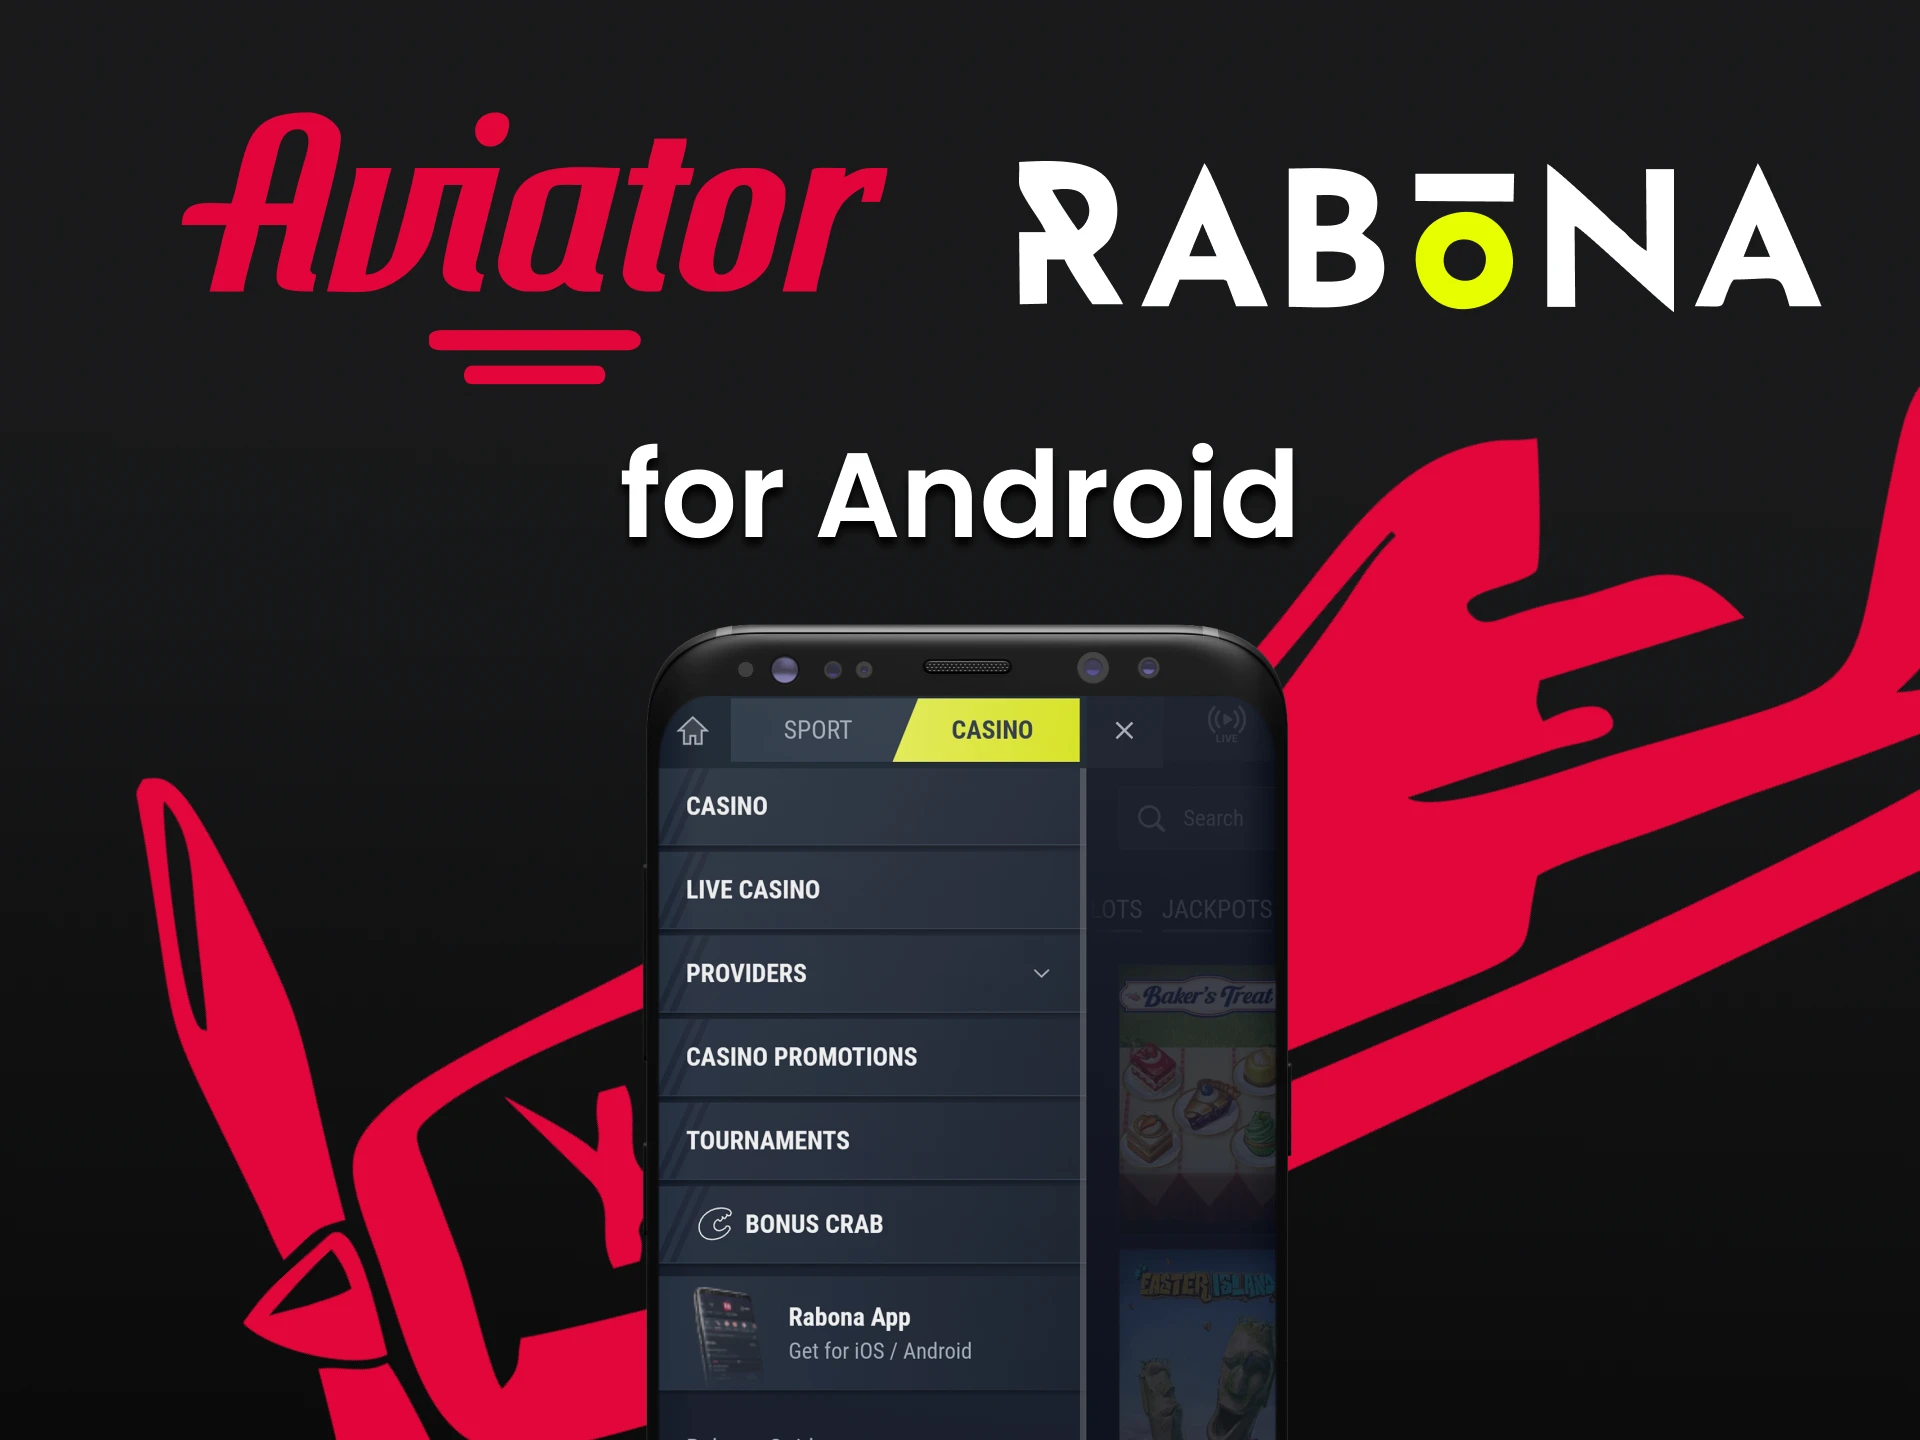 Download the Rabona app on your Android device to play Aviator.